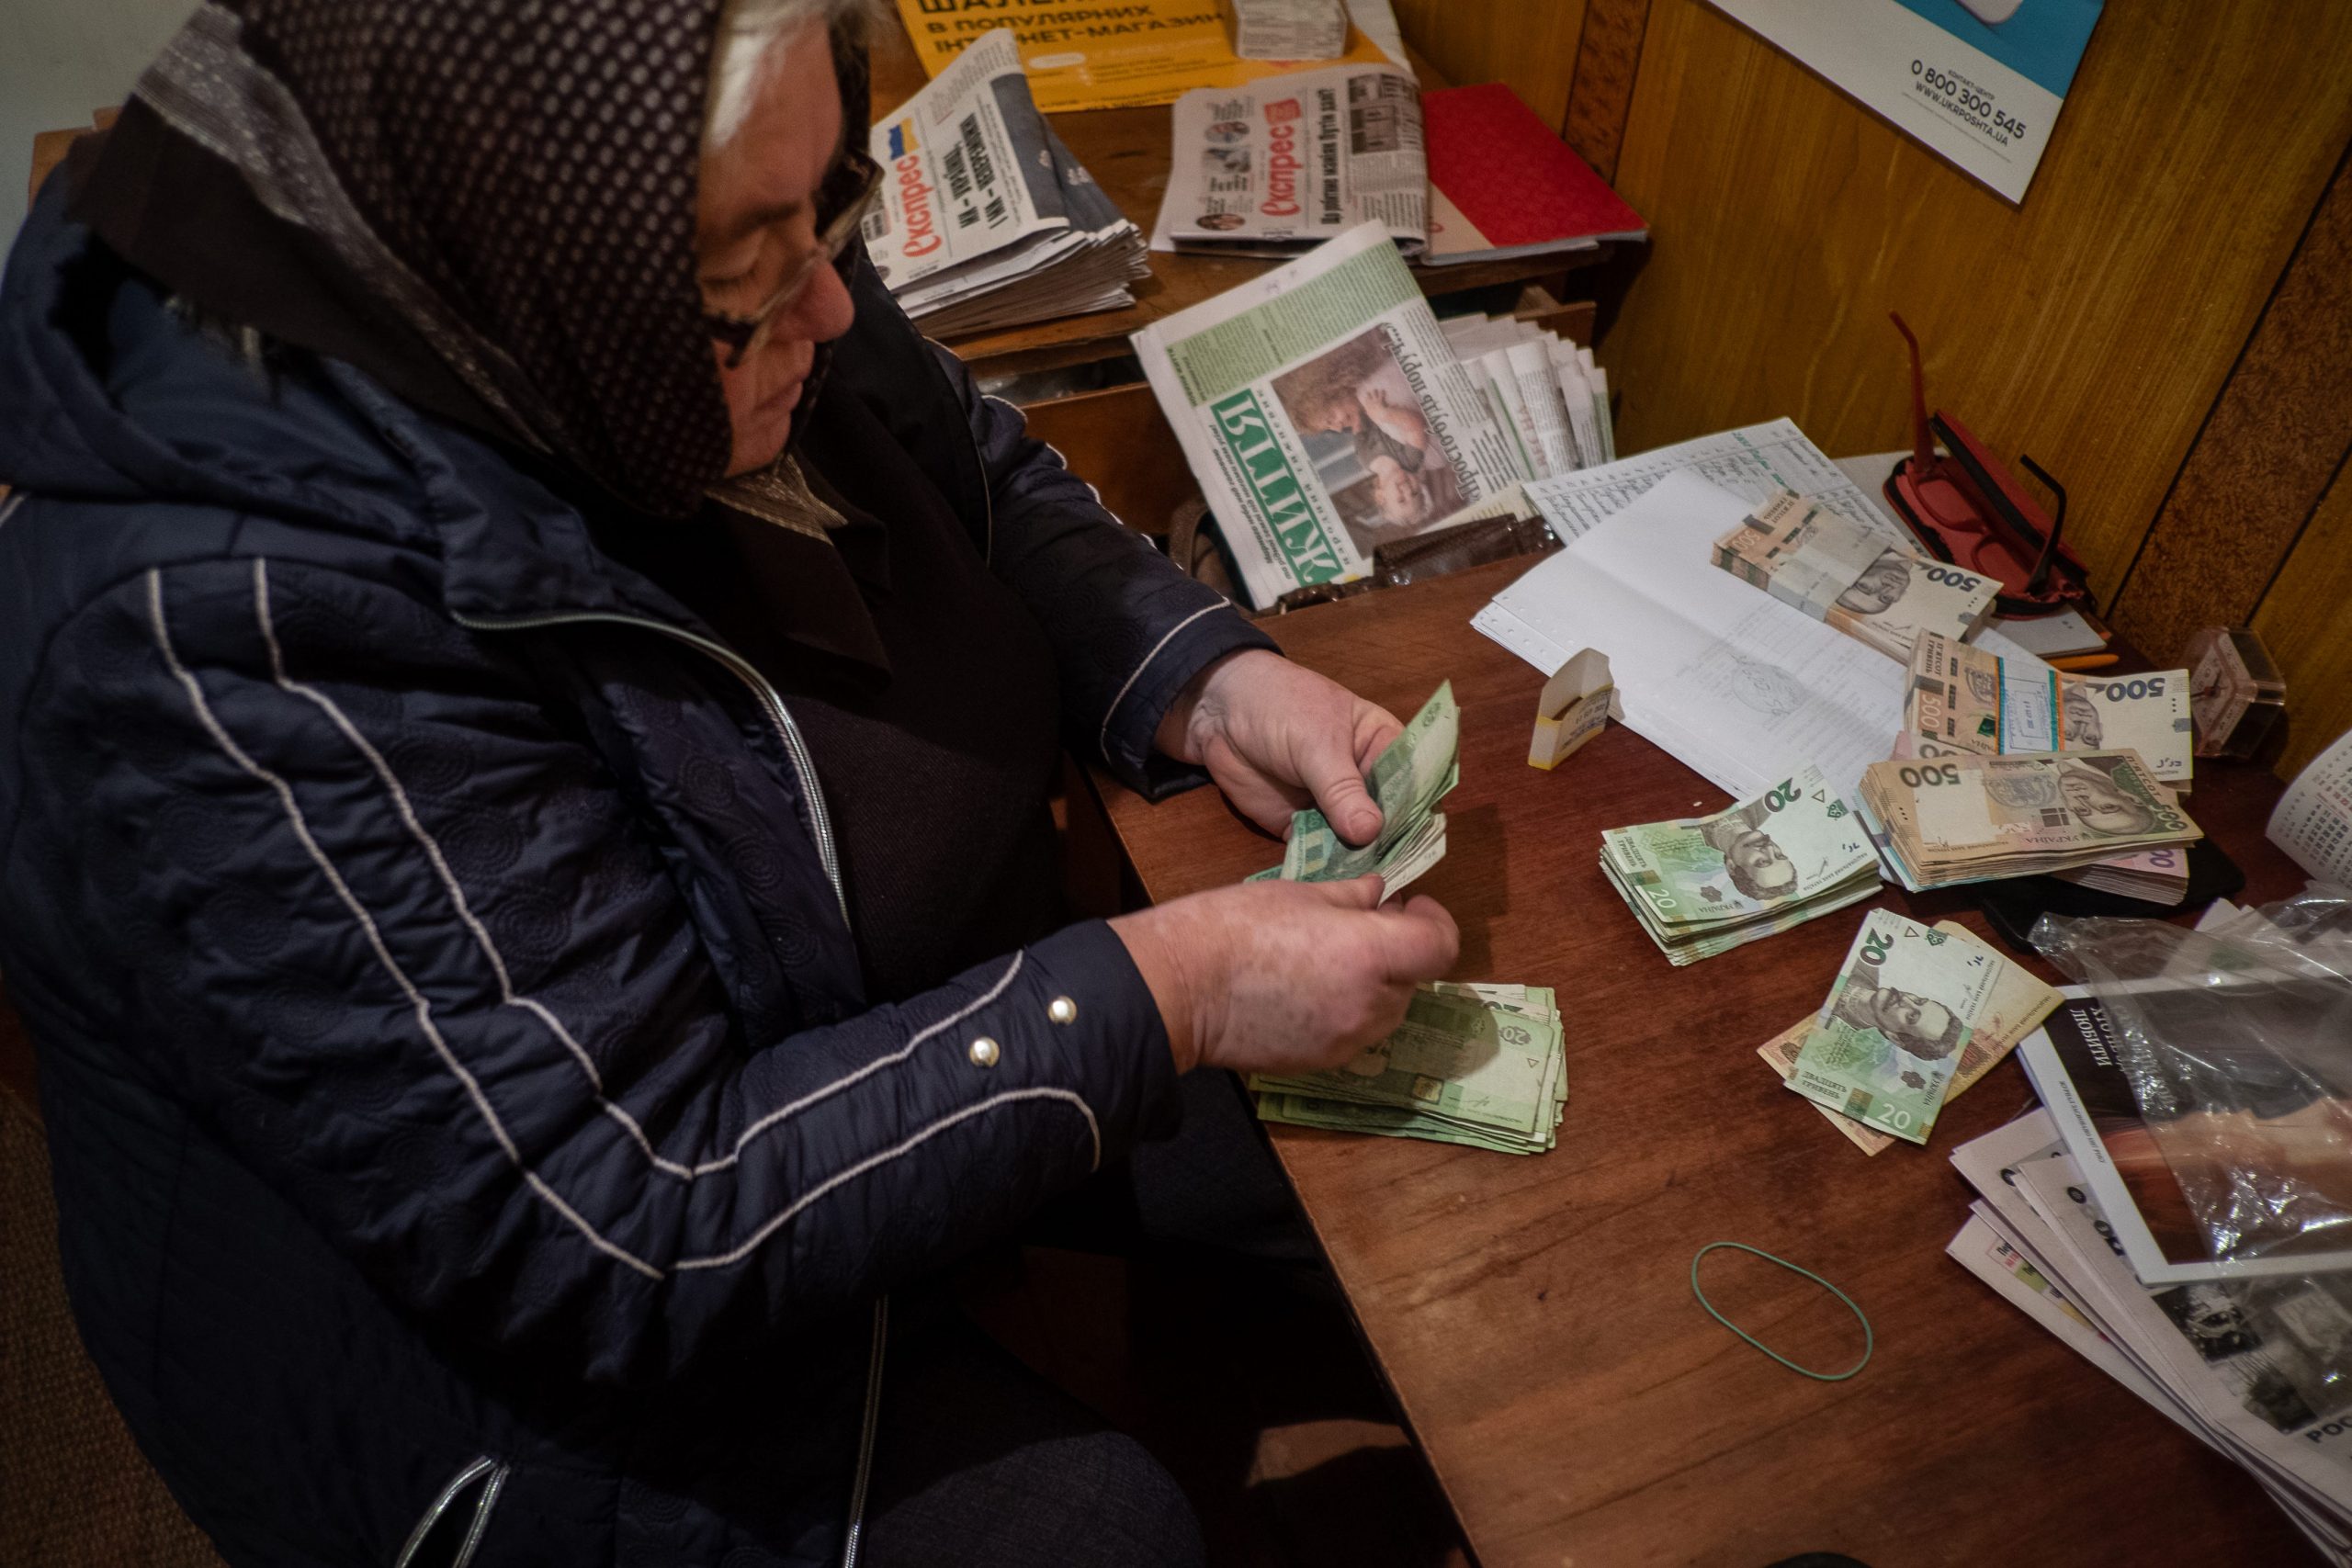 Stacks of money sit on a wooden table as a woman counts it.